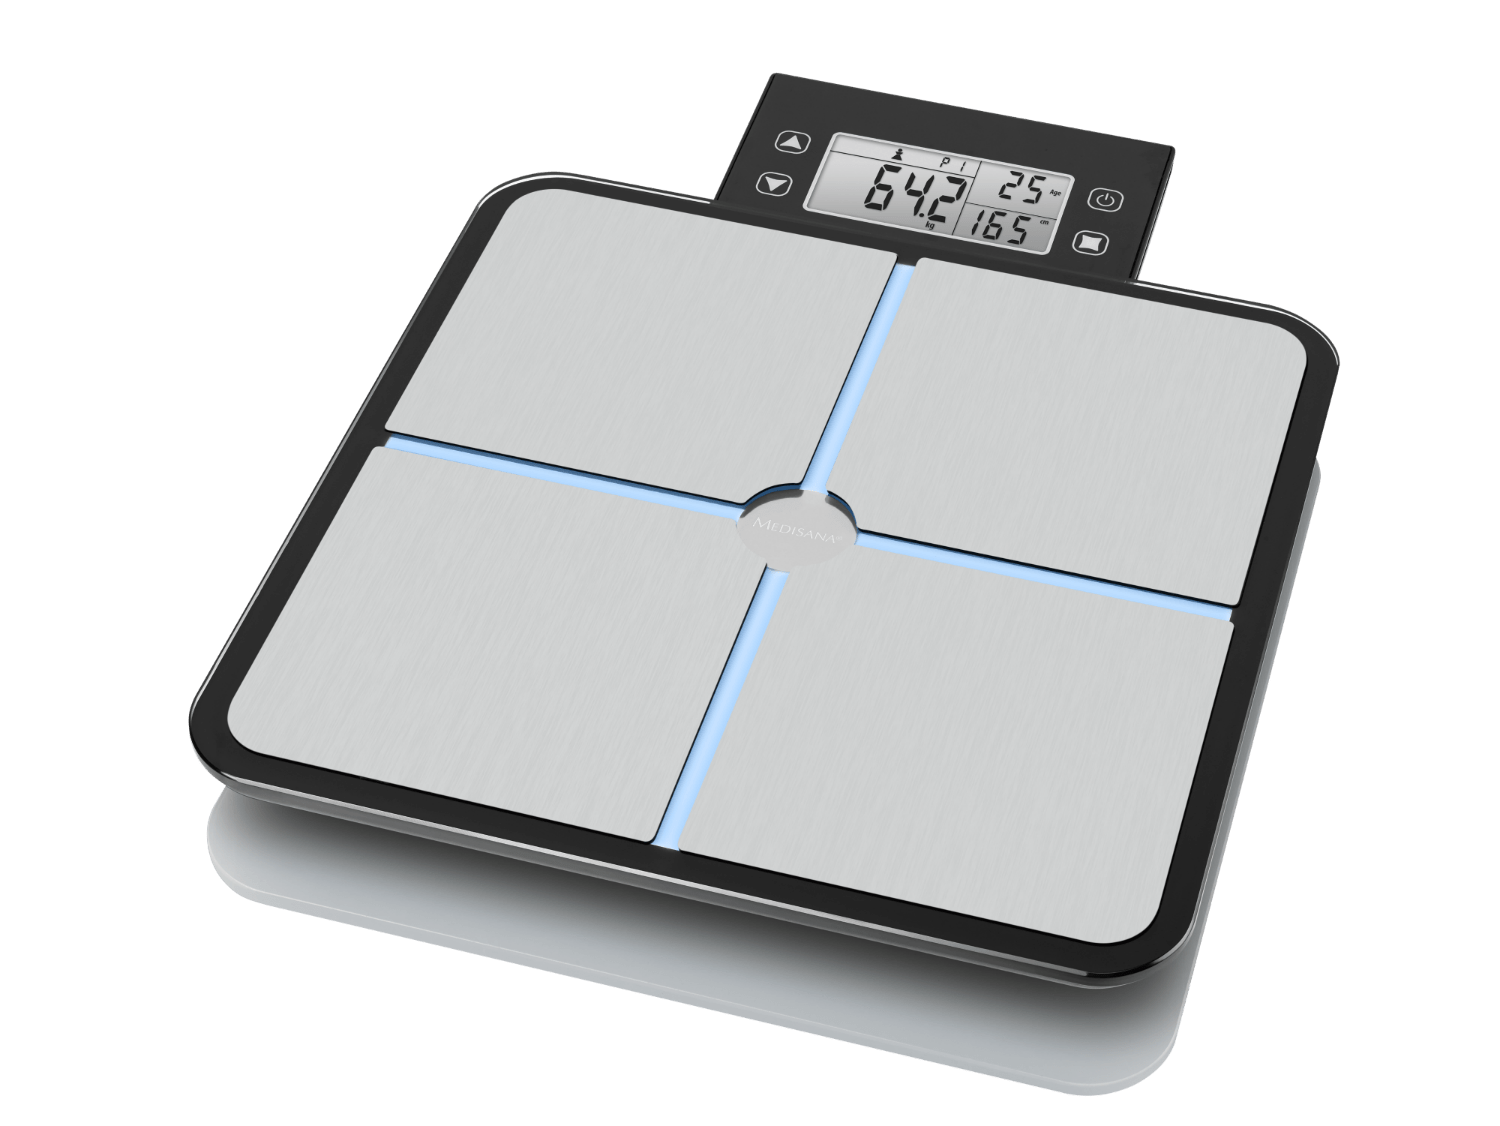 Body Weight Scale – Medisana BS-460 w/Detachable Display